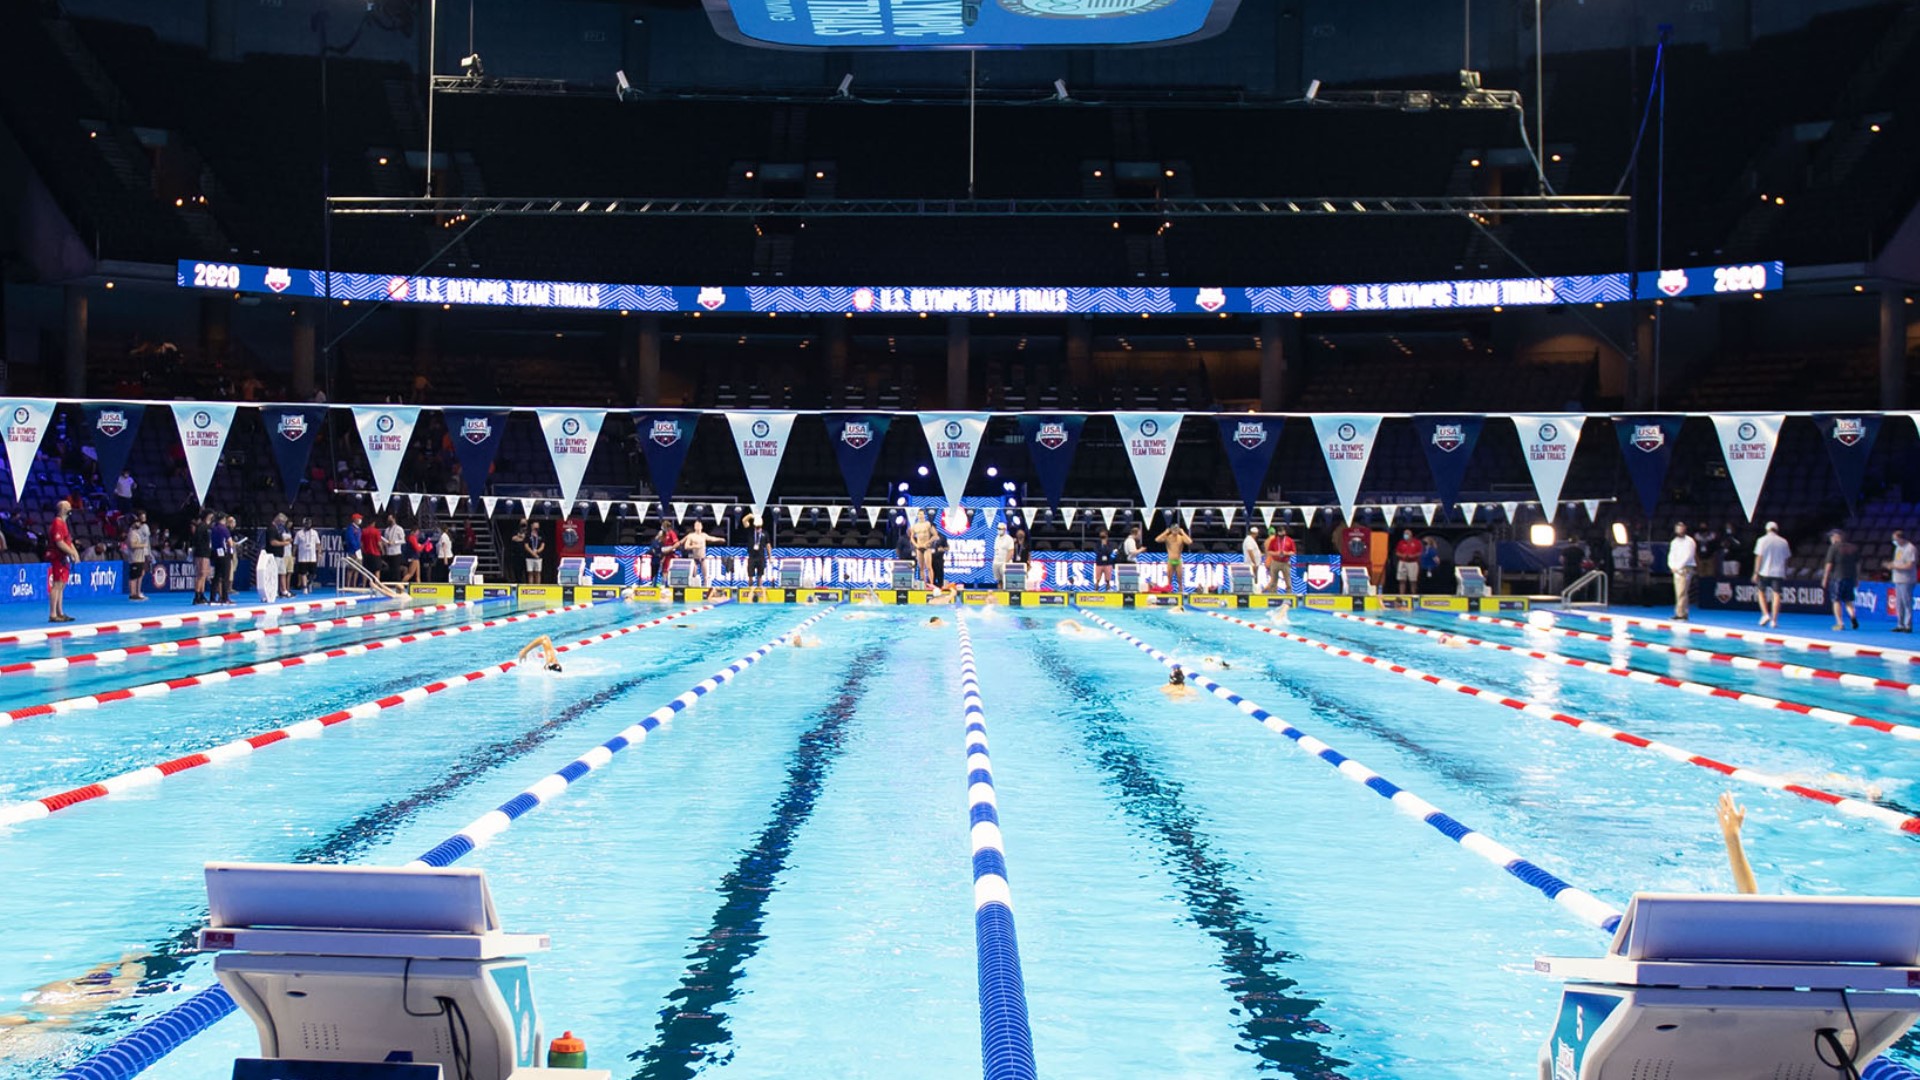 Ahead of the US Swimming Trials next month, organizers have made it their goal to train 50-thousand people how to stay safe in the water by the end of the year.